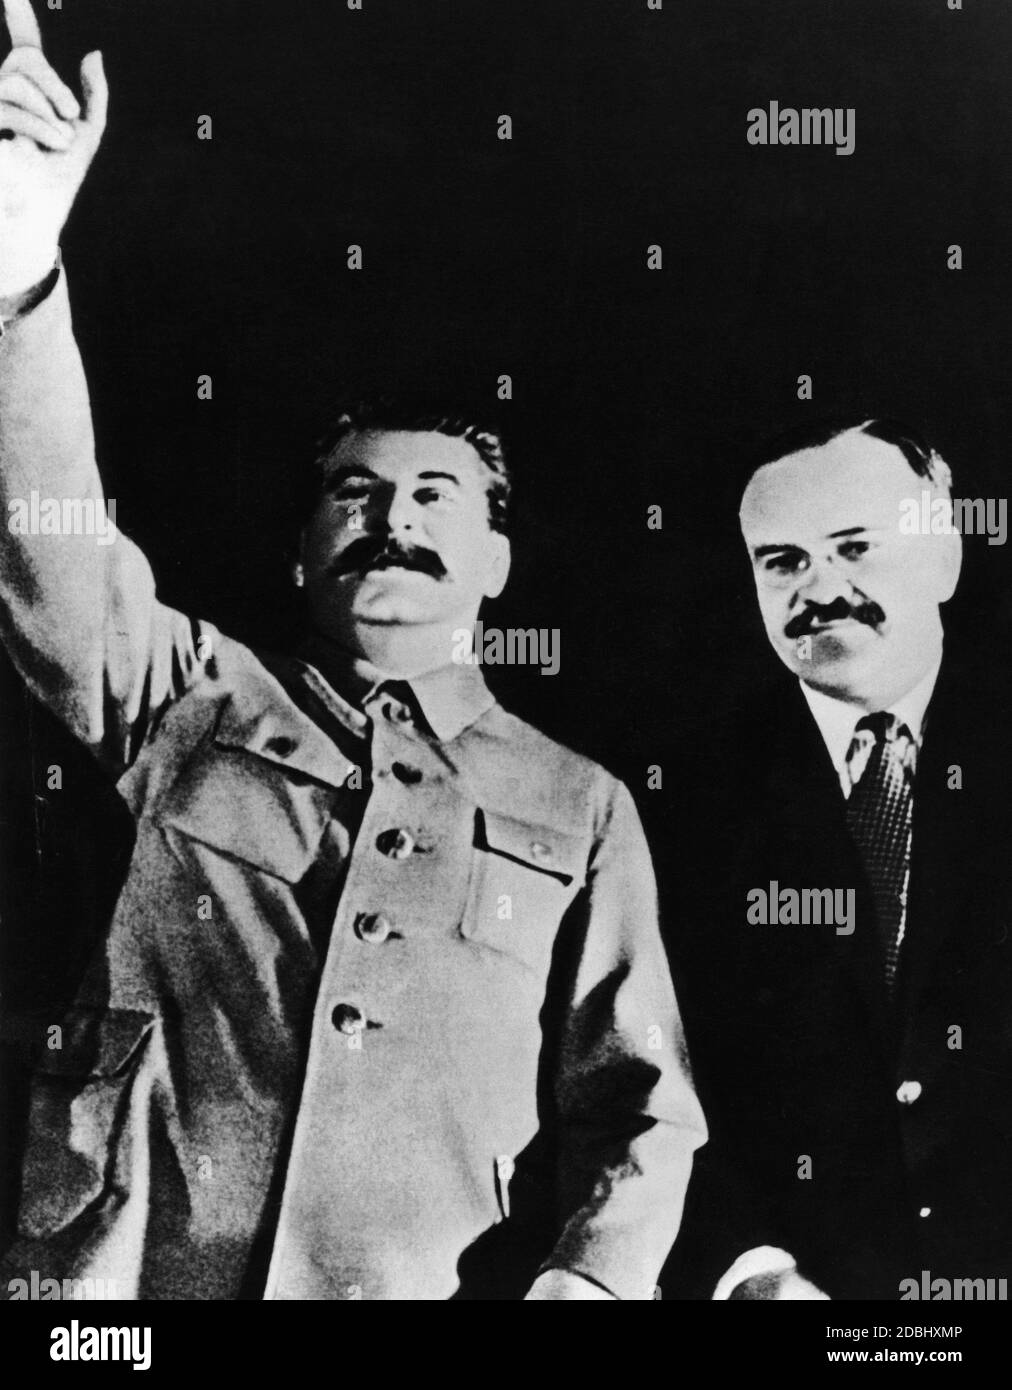 Ioseb Besarionis dz? Djugashvili, adopted name Stalin, dictator of the Soviet Union from 1927 to 1954. Photos of Stalin destined for publication were carefully selected and were intended to support the personality cult around him. Here, Stalin with his long-time foreign minister Molotov in 1938. Stock Photo